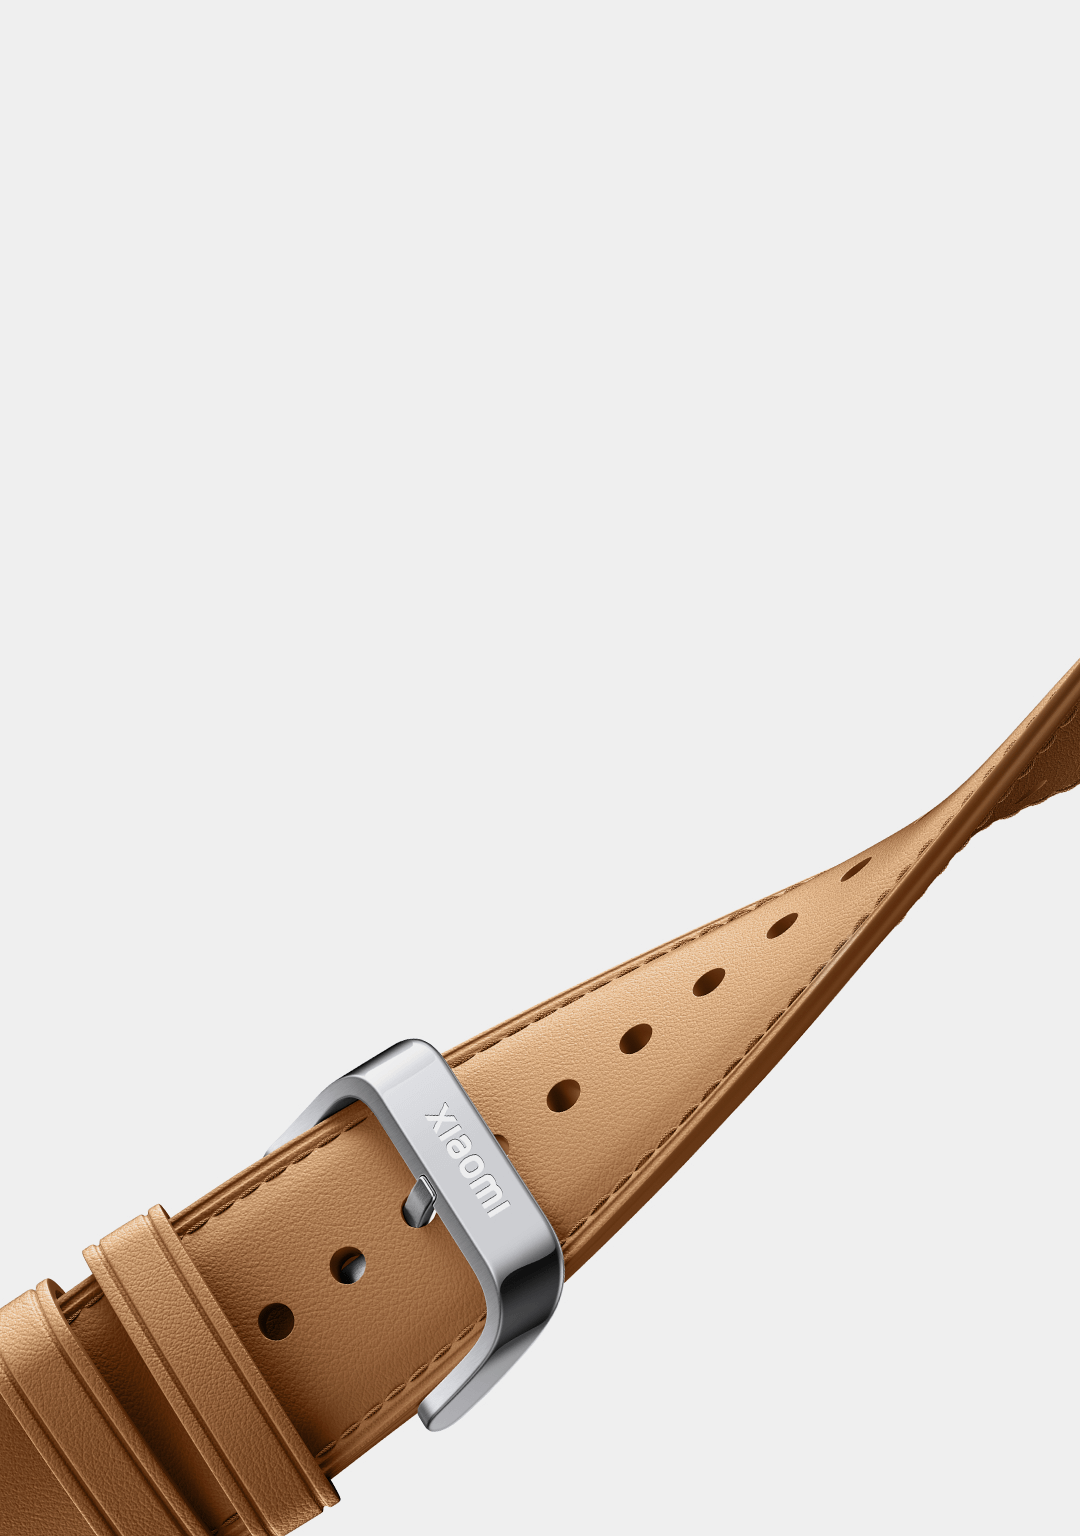 Luxurious Leather 22MM Watchband For Xiaomi Watch S1 Pro / Active